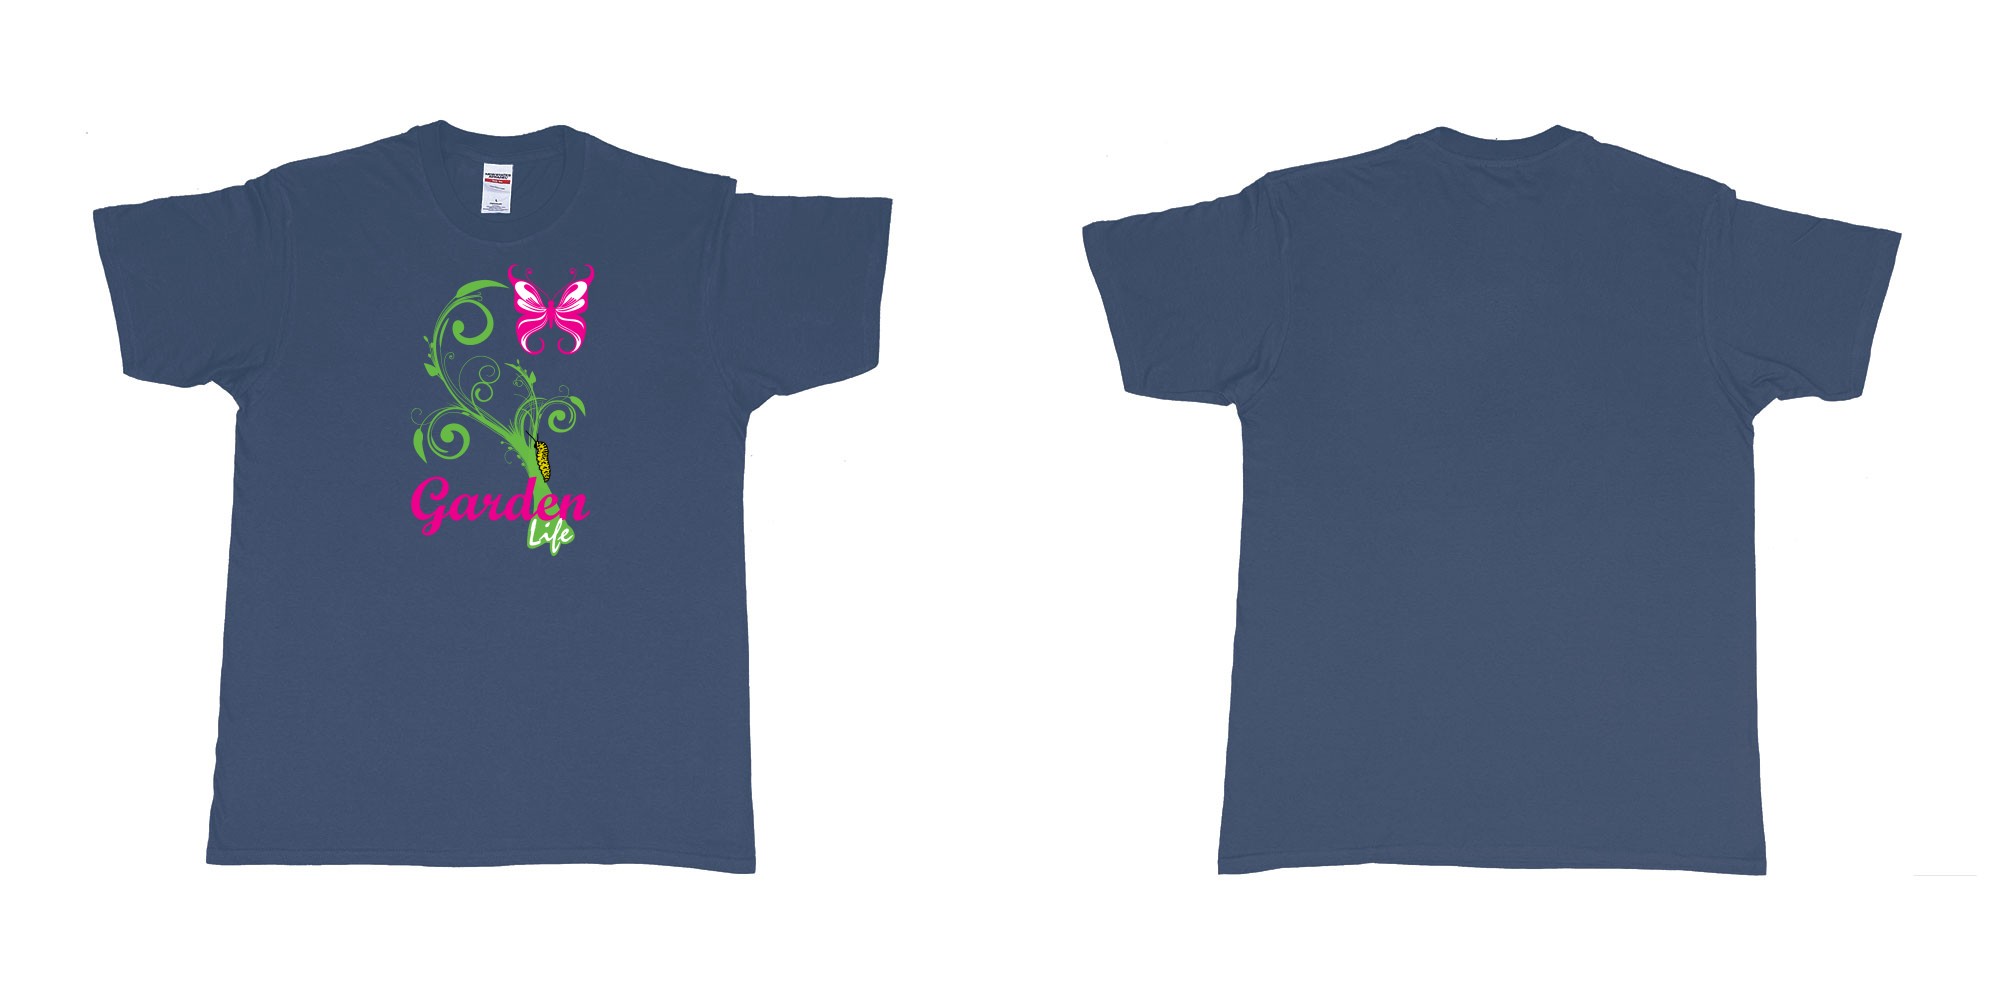 Custom tshirt design garden life transformation from a caterpillar and a butterfly in fabric color navy choice your own text made in Bali by The Pirate Way